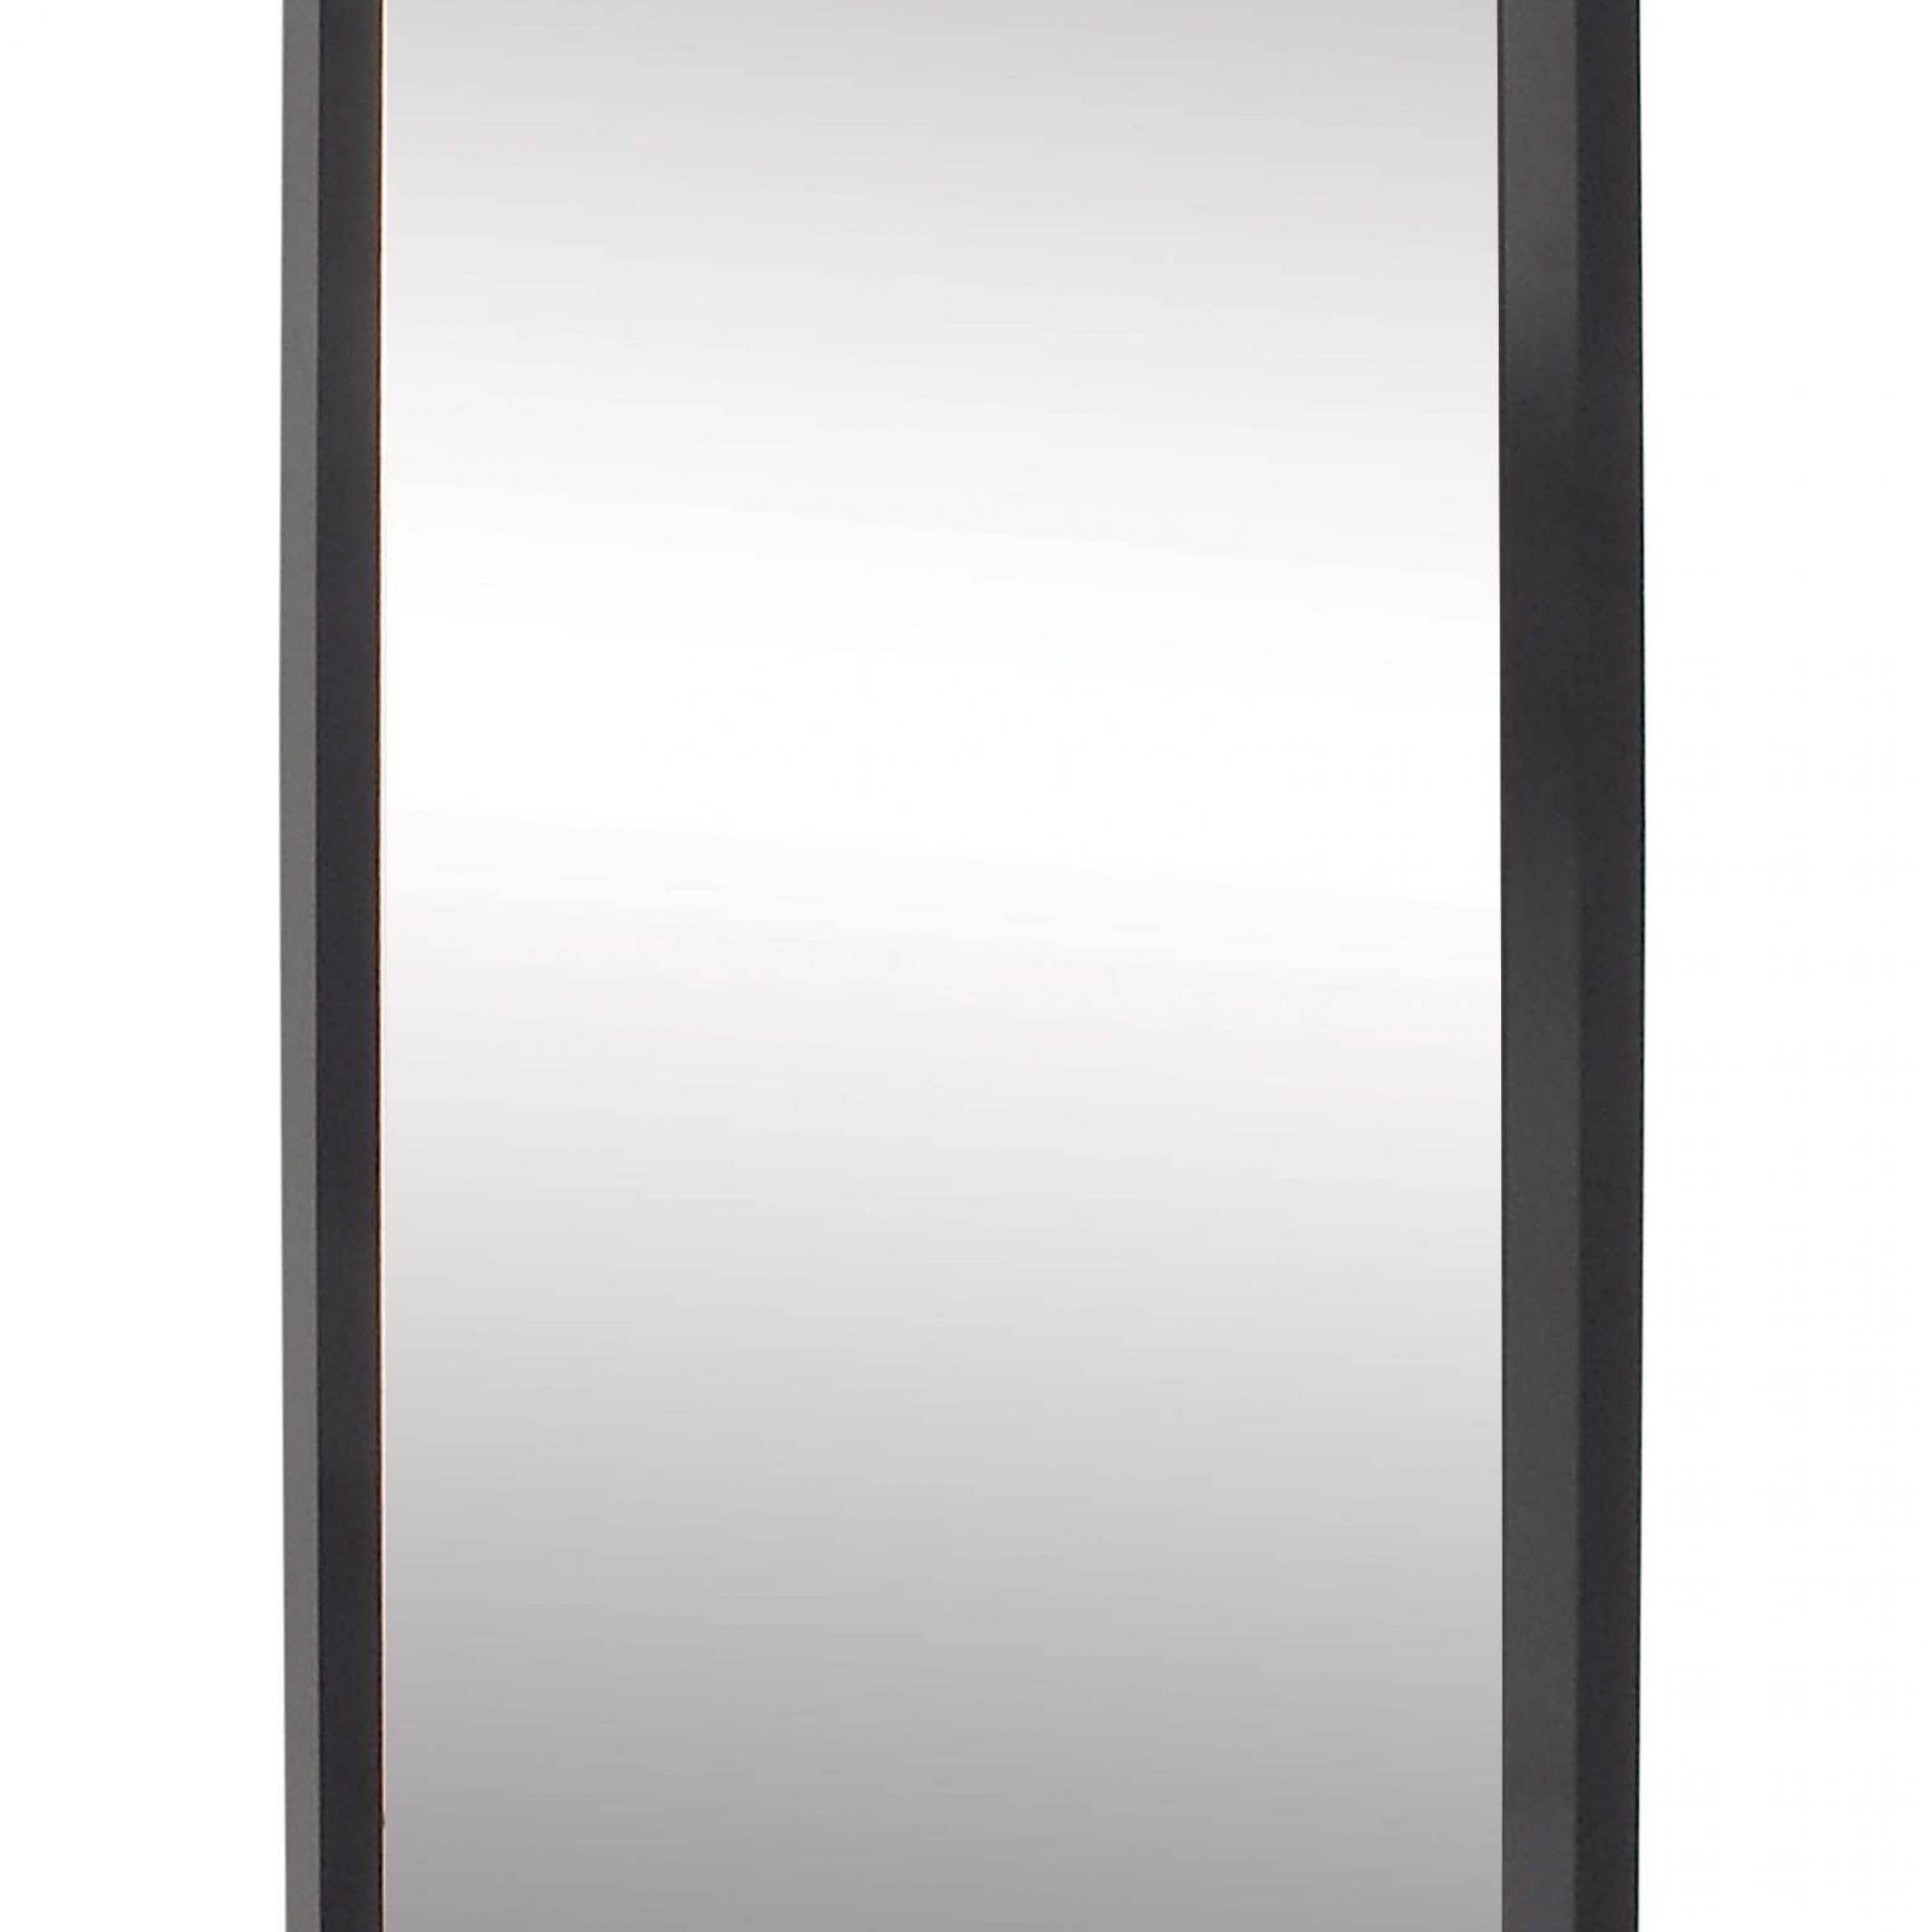 Decmode Contemporary 47 X 20 Inch Wooden Rectangular Wall Mirror, Black Intended For Black Beaded Rectangular Wall Mirrors (View 8 of 15)